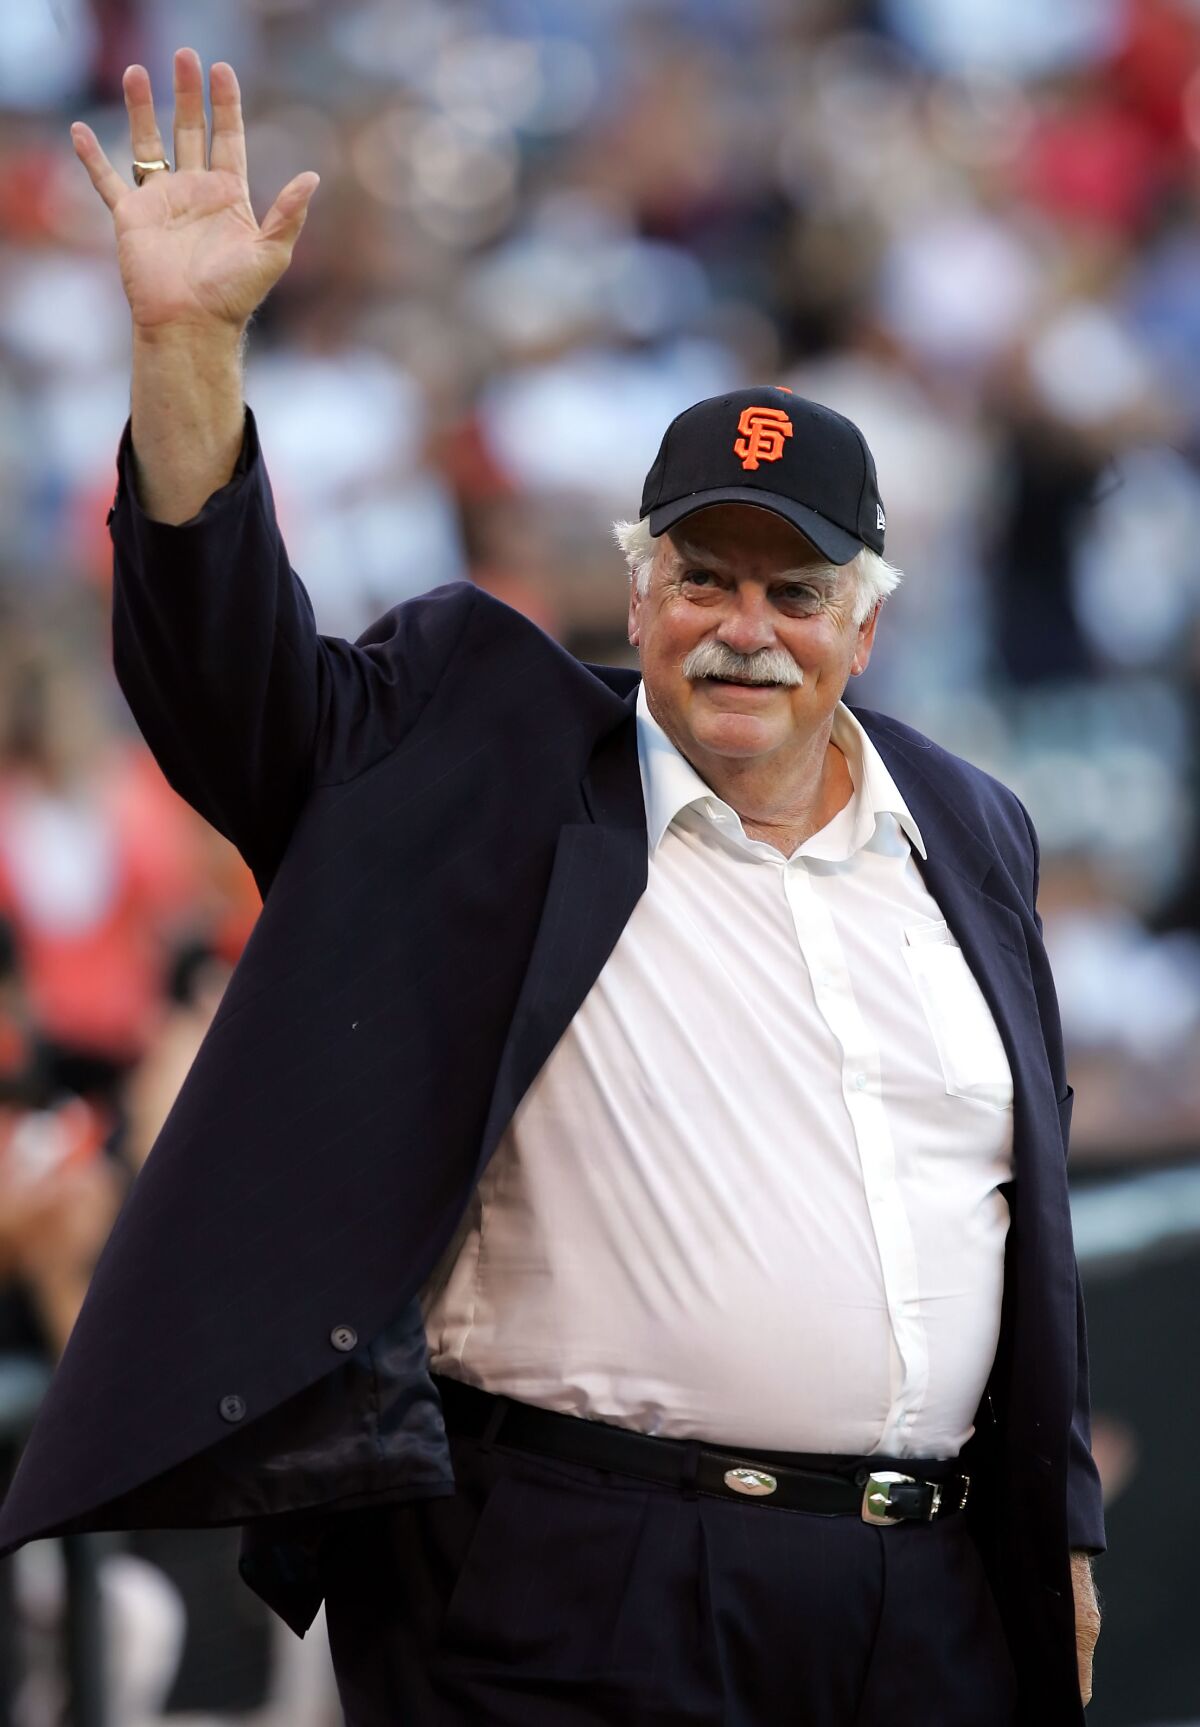 Gaylord Perry pitched 22 years in the major leagues, the first 10 seasons with the San Francsco Giants, during his Hall of Fame career.